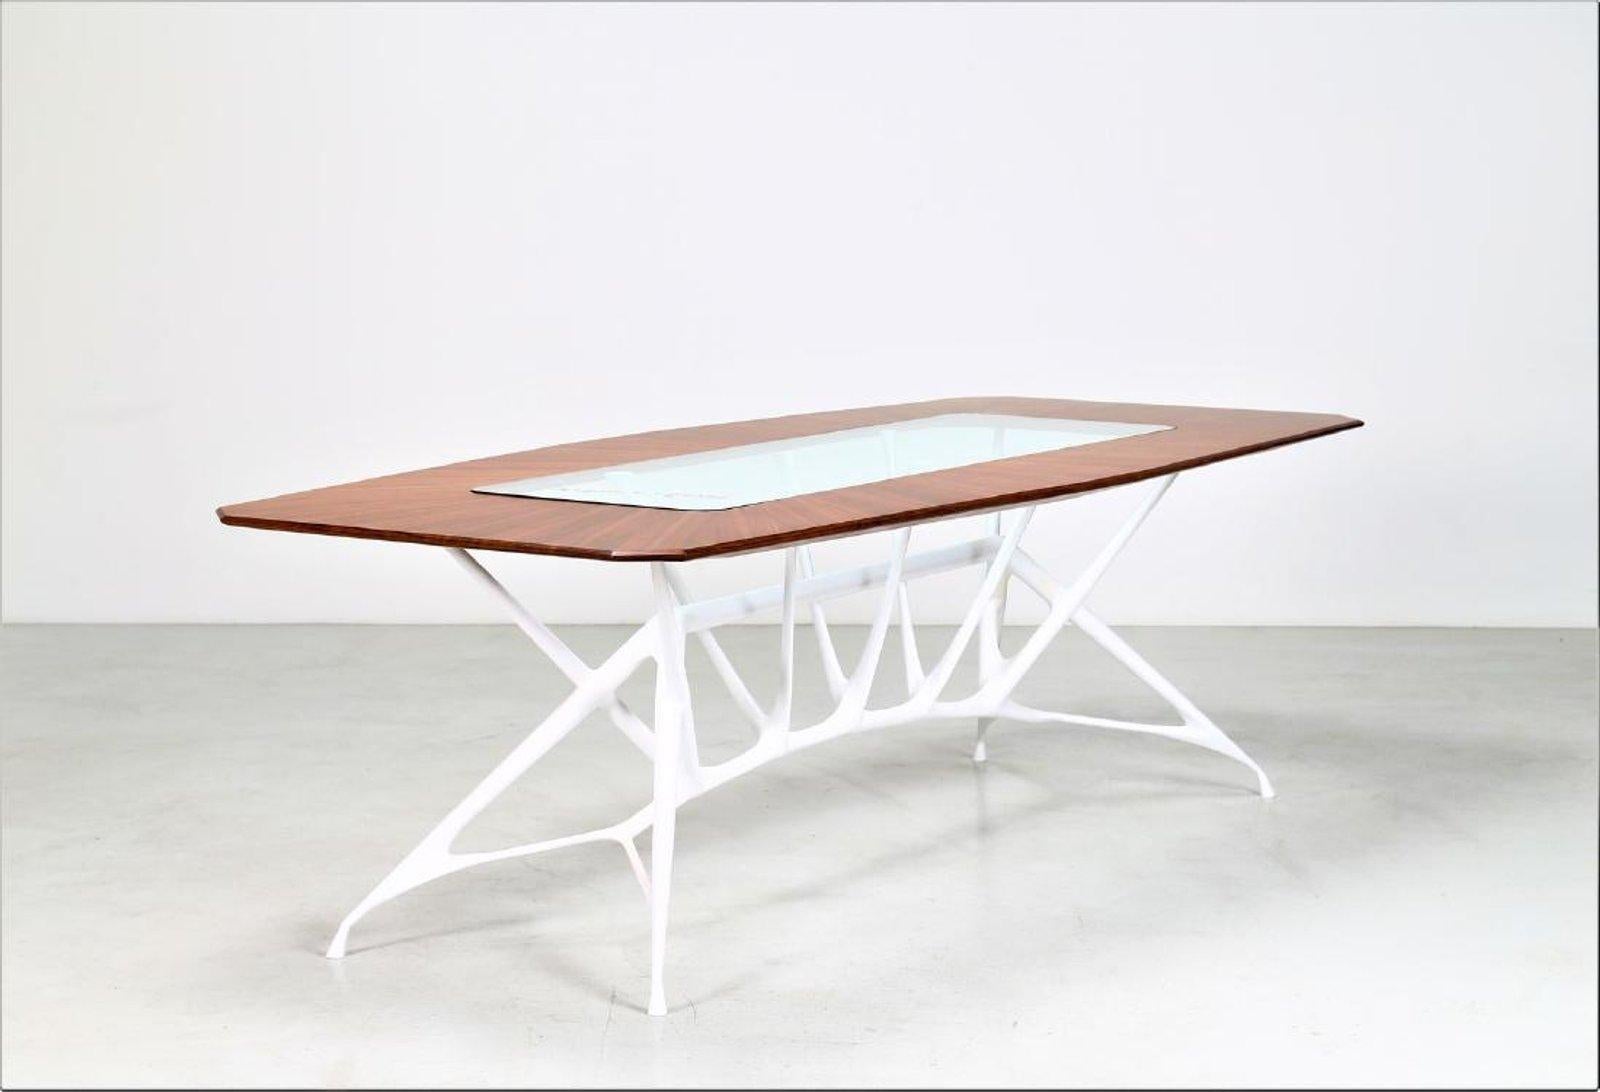 Contemporary Architectural Dining Table designed by L'Opere e i Giorni. 
Wood top with glass insert and painted metal and fiberglass legs.
Signed underneath: L'Opere e i Giorni